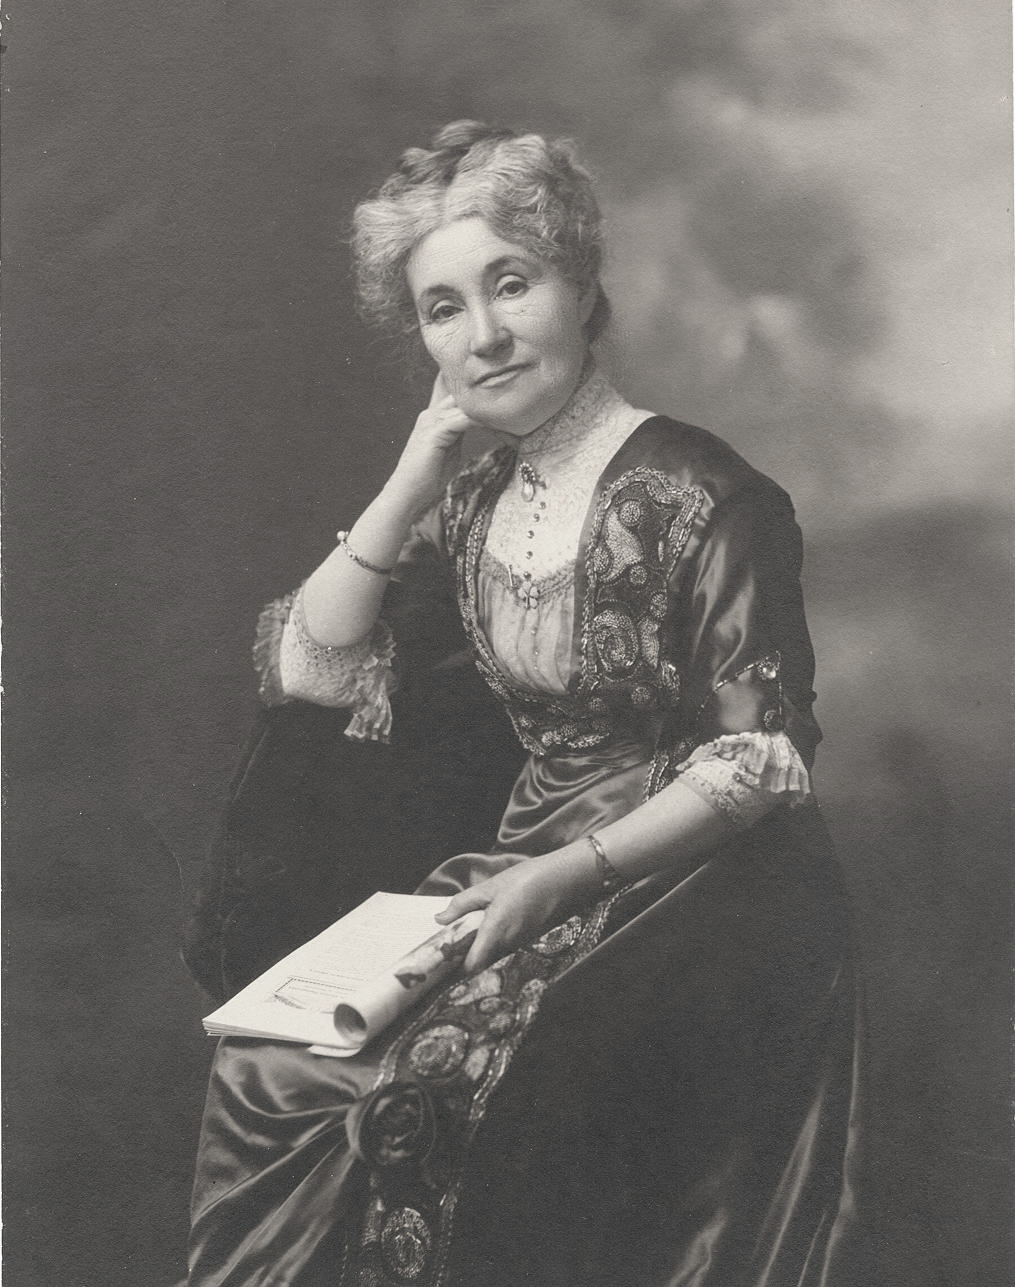 Woman with grey hair wearing a black dress with a book in her hand.